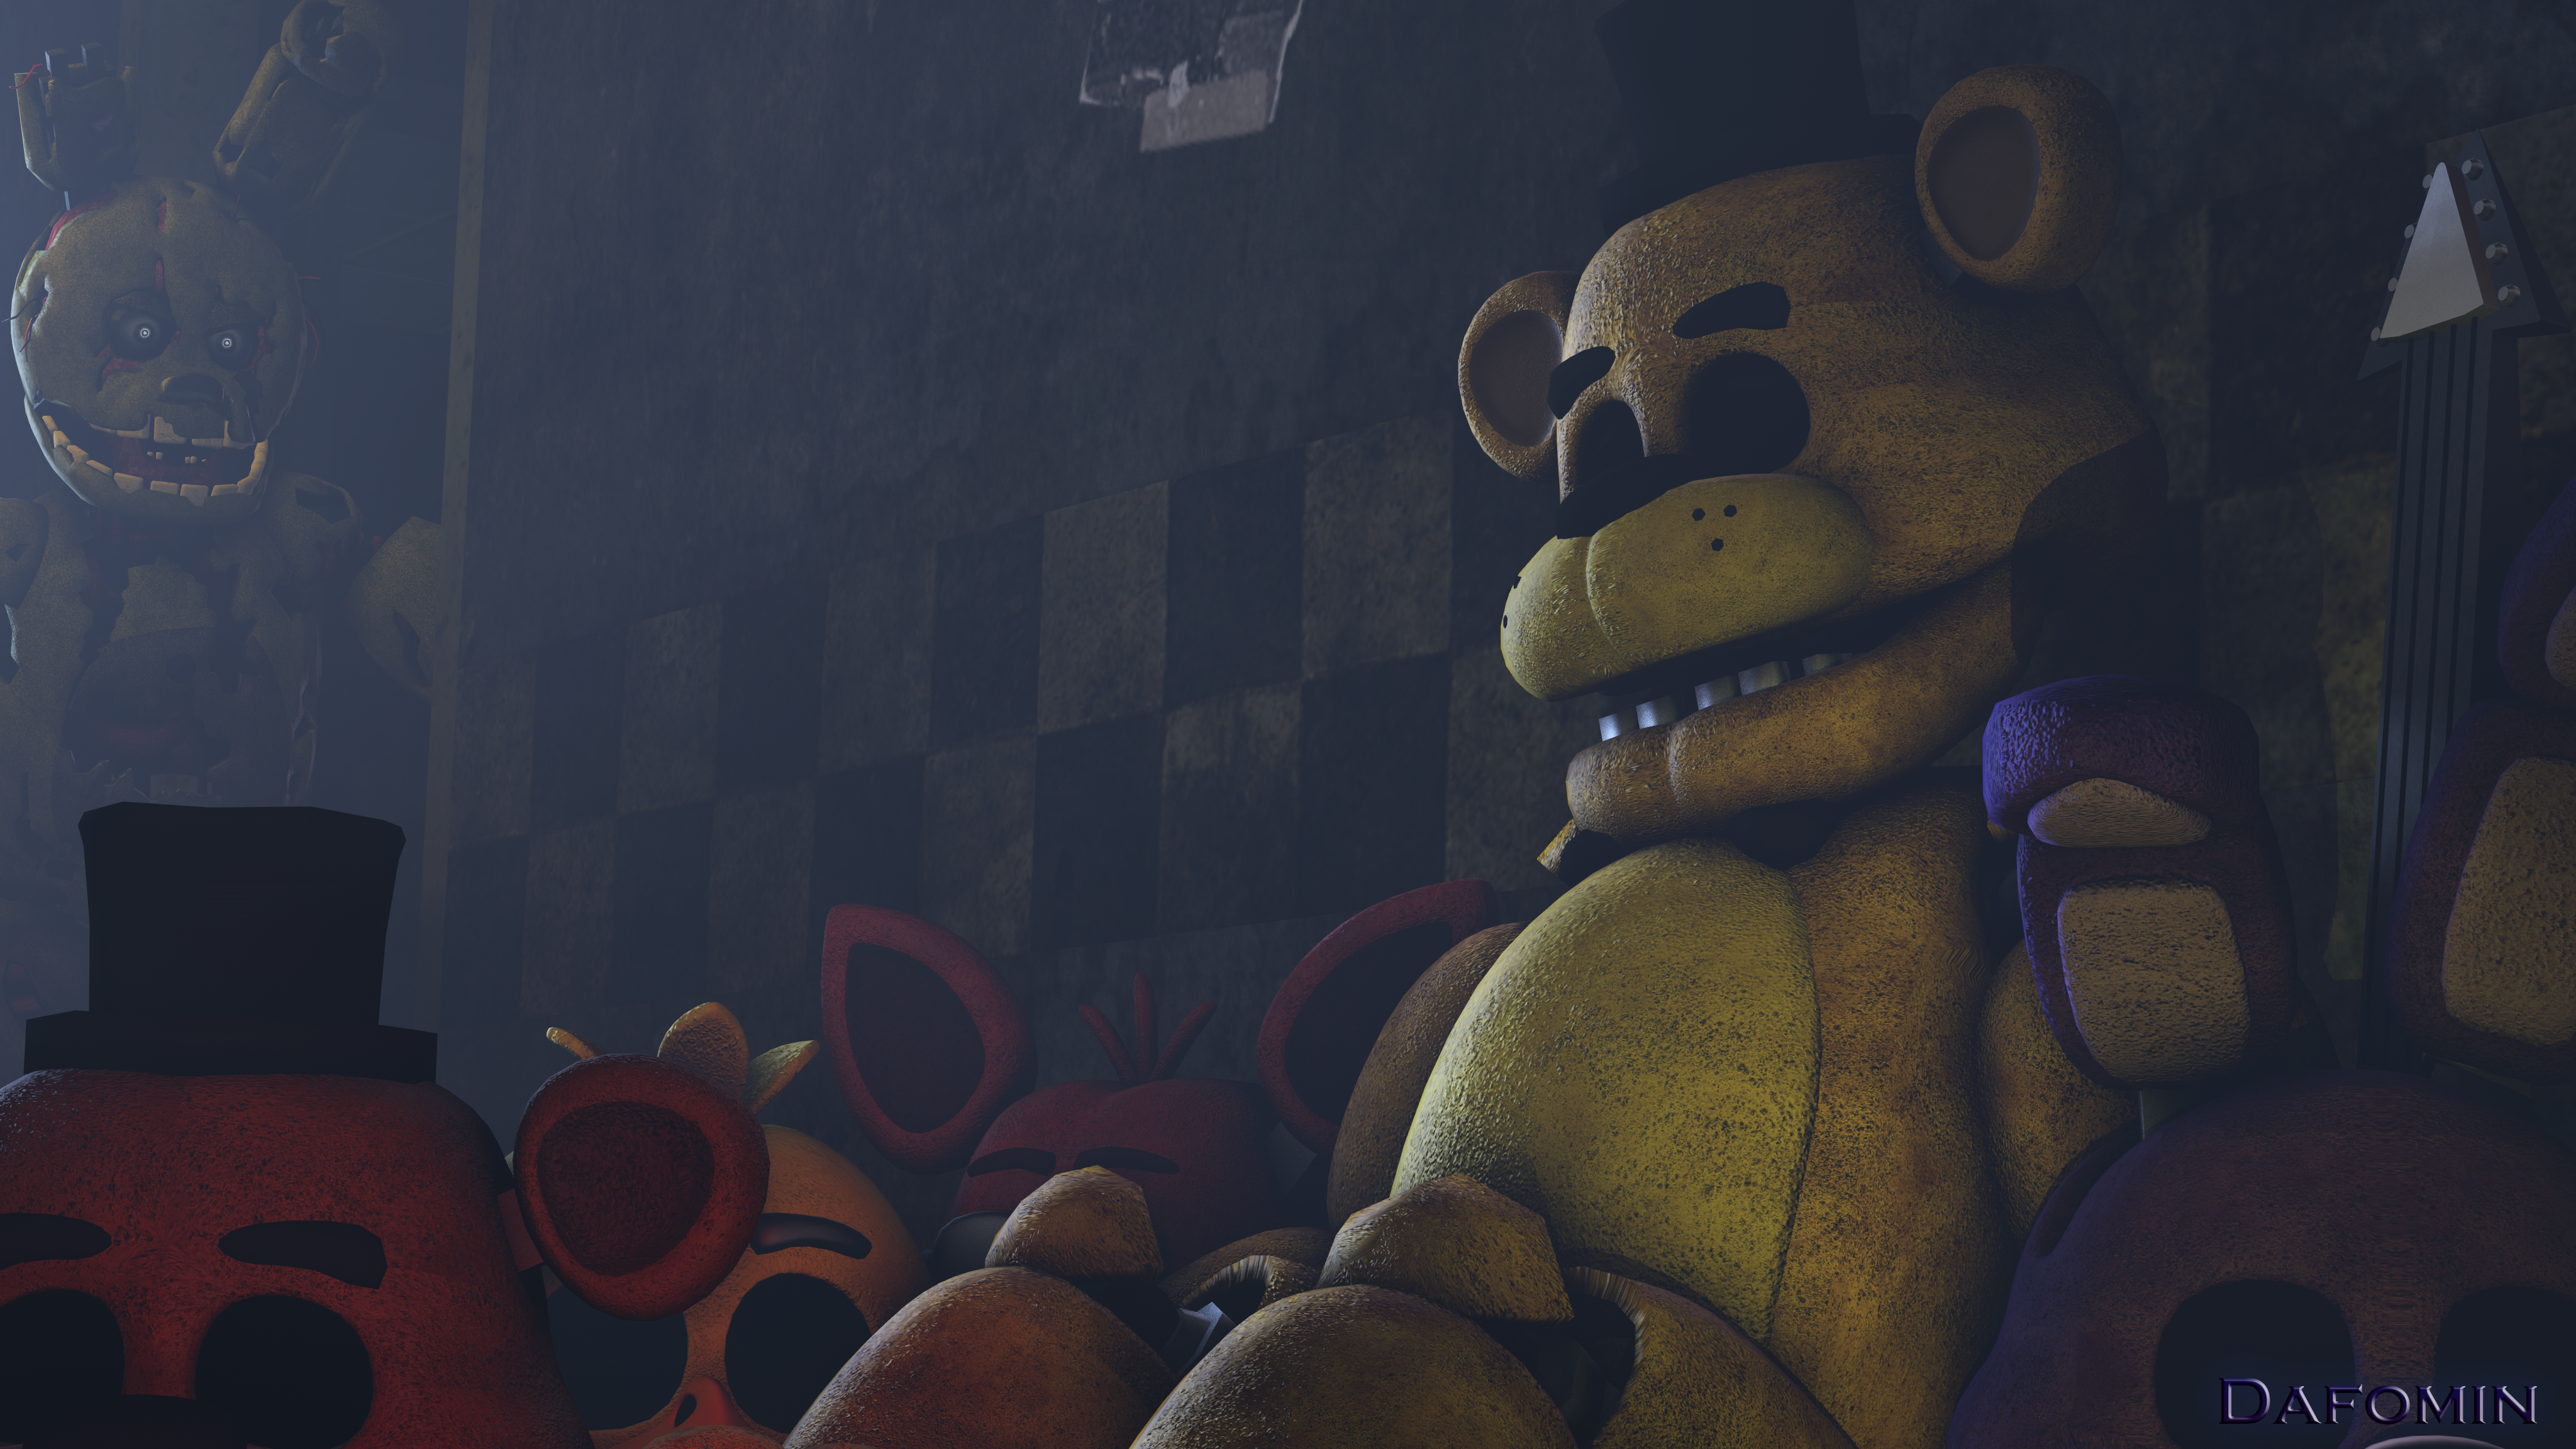 Five Nights at Freddy's 3 4k Ultra HD Wallpaper. Background Image